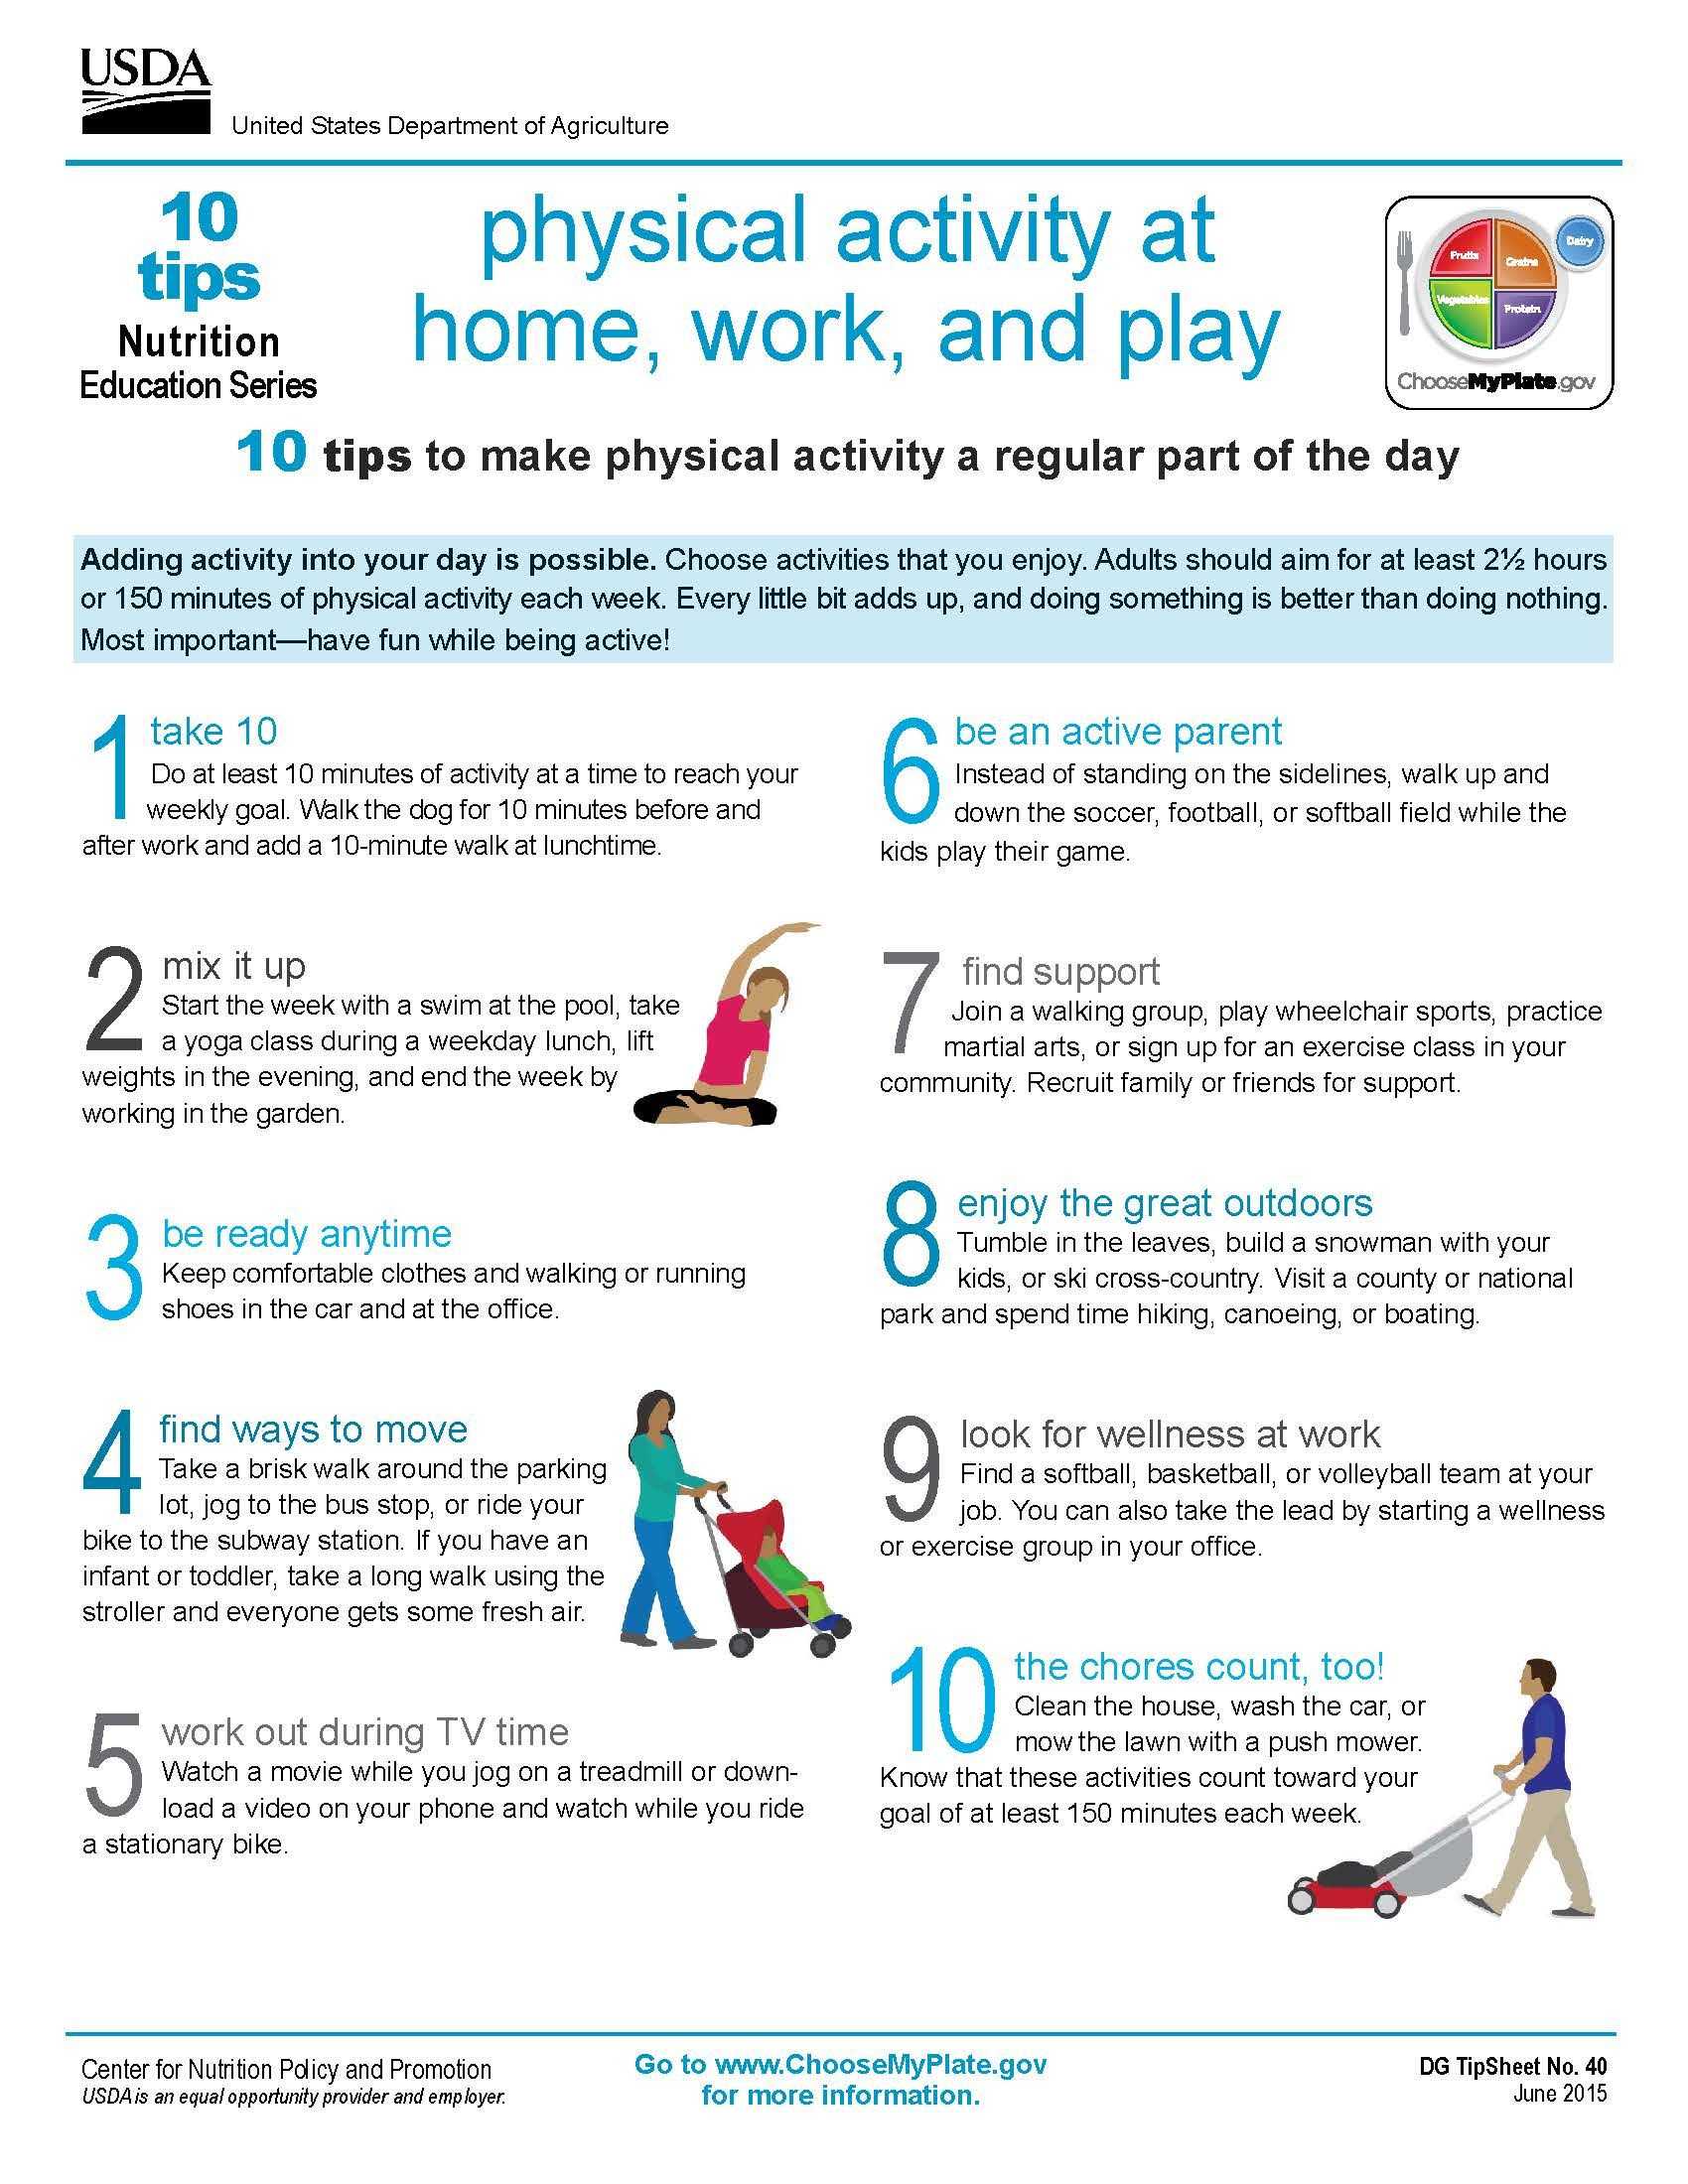 Health and Wellness Worksheets together with 10 Tips Physical Activity at Home Work and Play Myplate